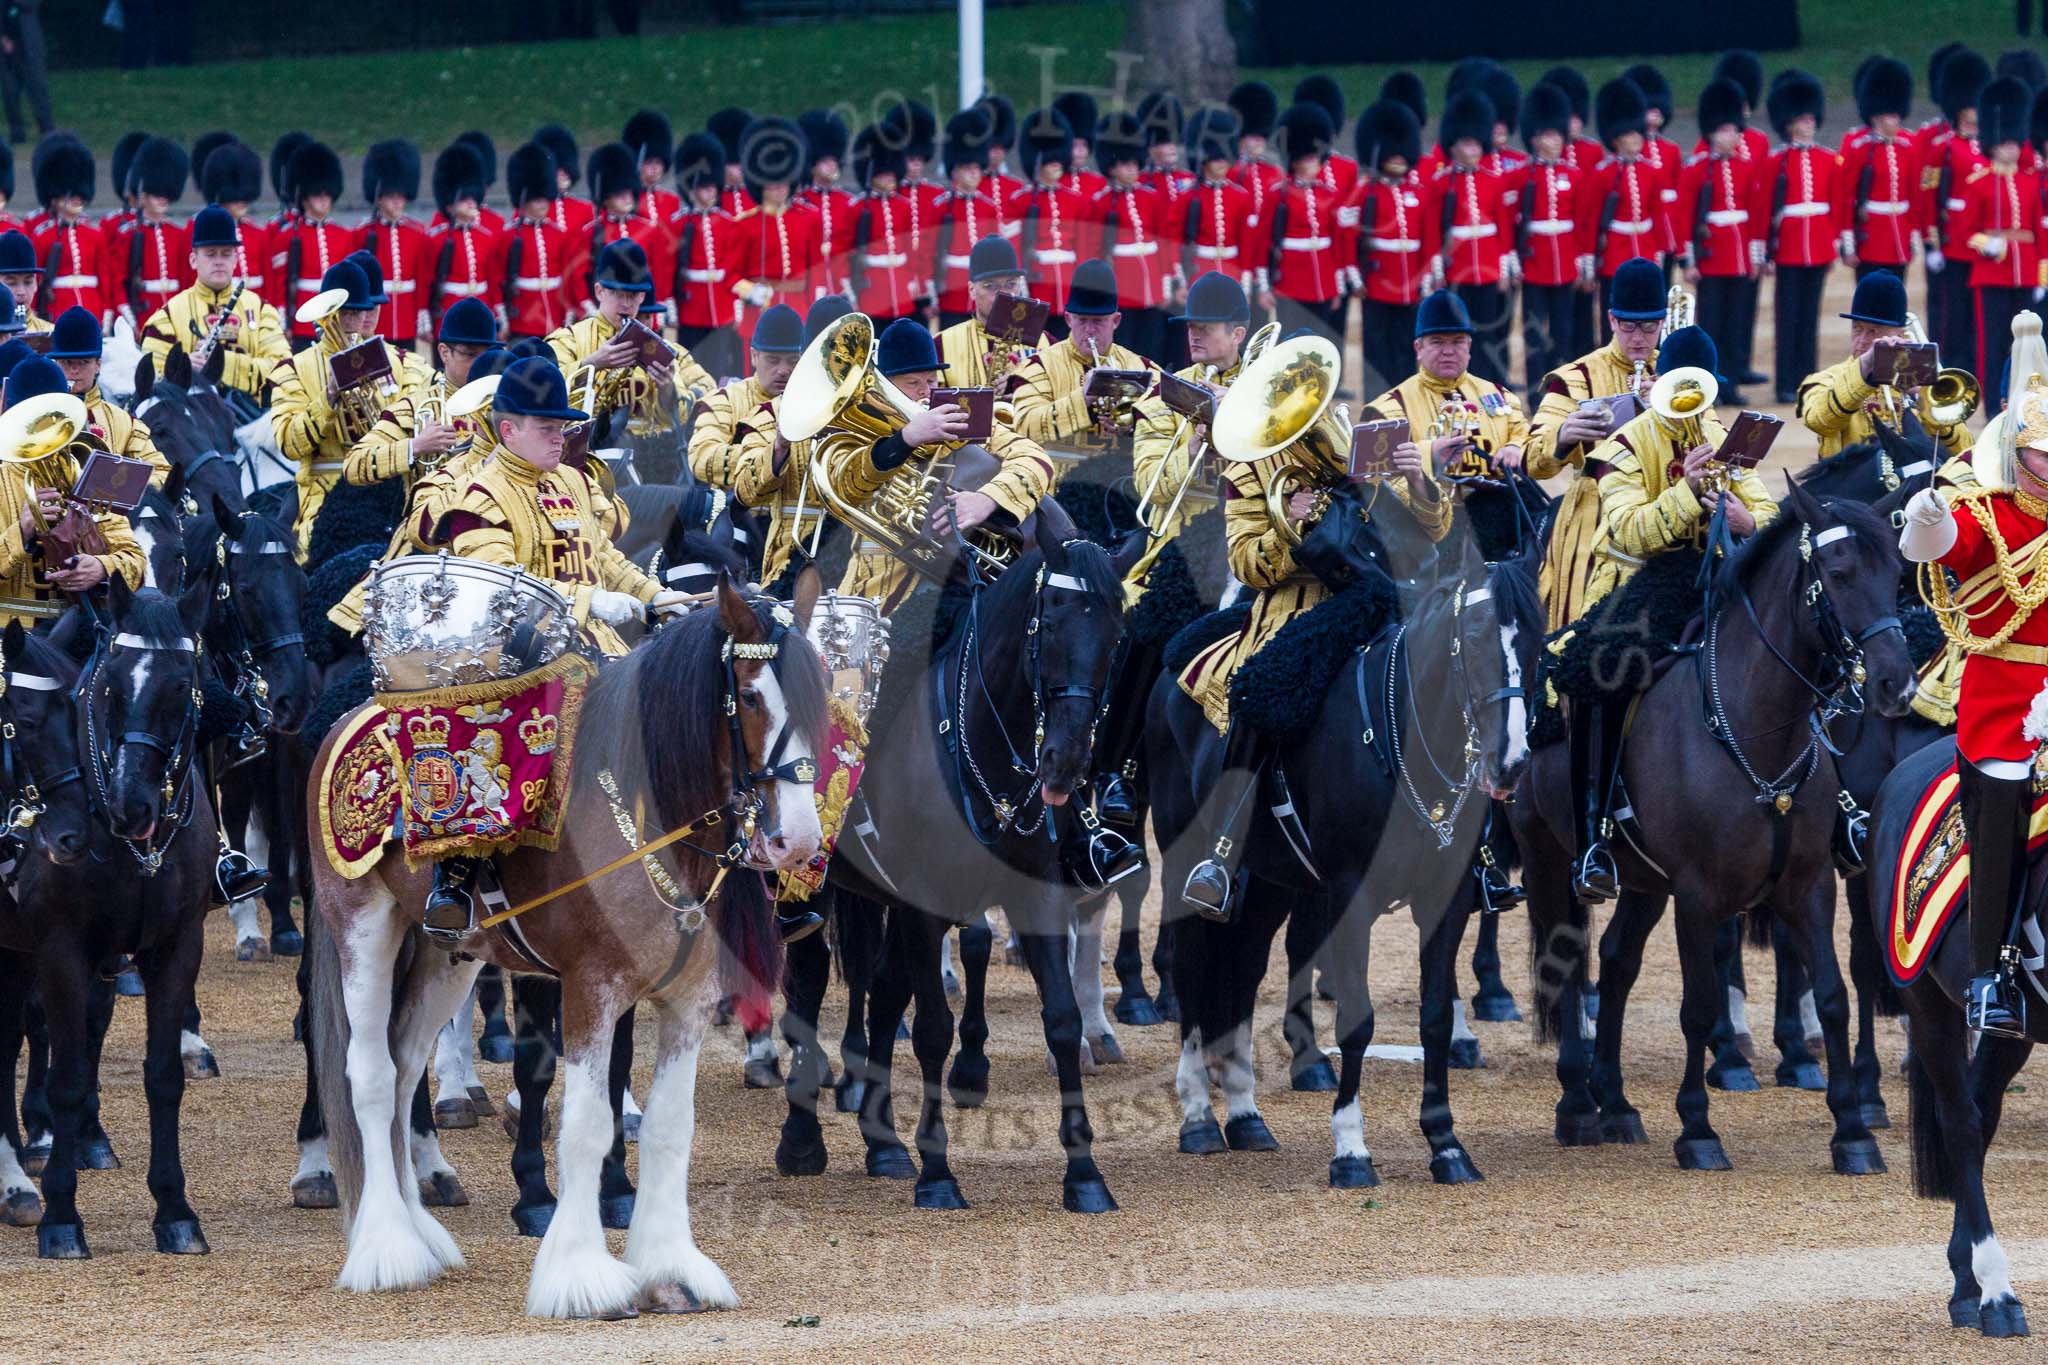 Trooping the Colour 2015. Image #528, 13 June 2015 11:52 Horse Guards Parade, London, UK